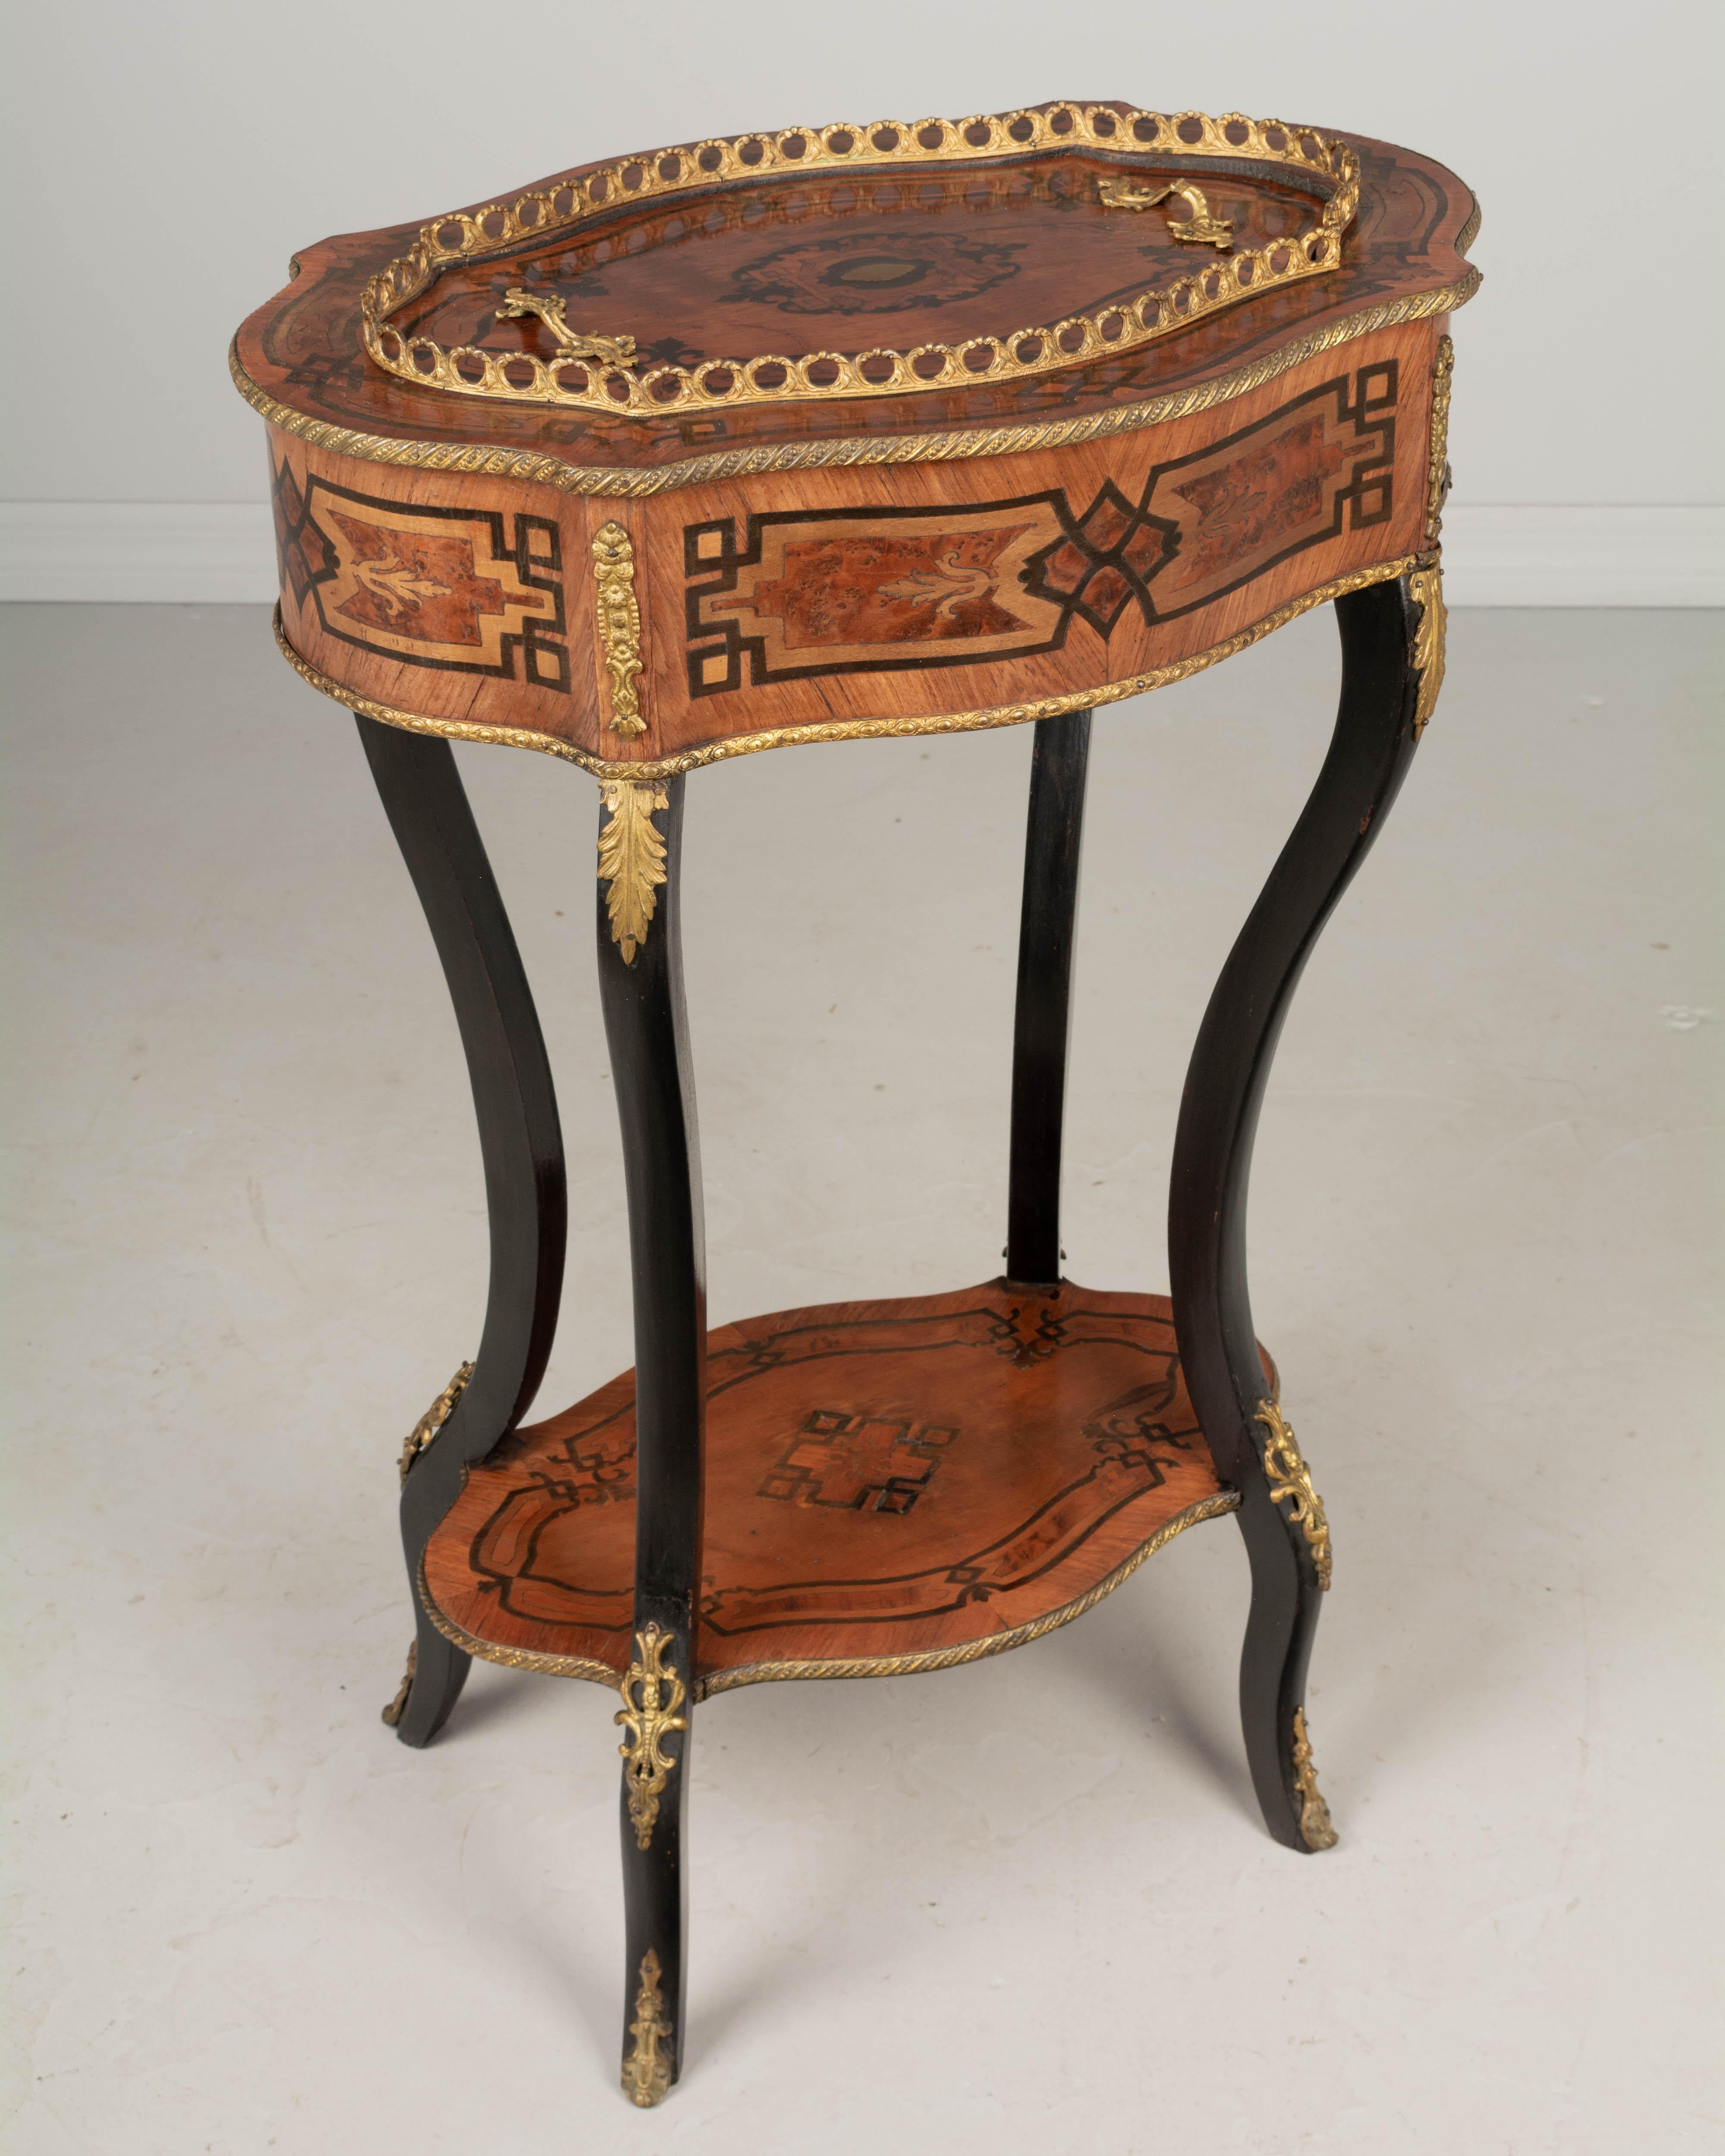 A 19th century French Napoleon III bronze mounted marquetry jardinière, or plant stand with inlaid veneers of mahogany and walnut. Curved ebonized legs joined by a lower shelf. The shaped oval top has cast bronze handles and lifts off to reveal and